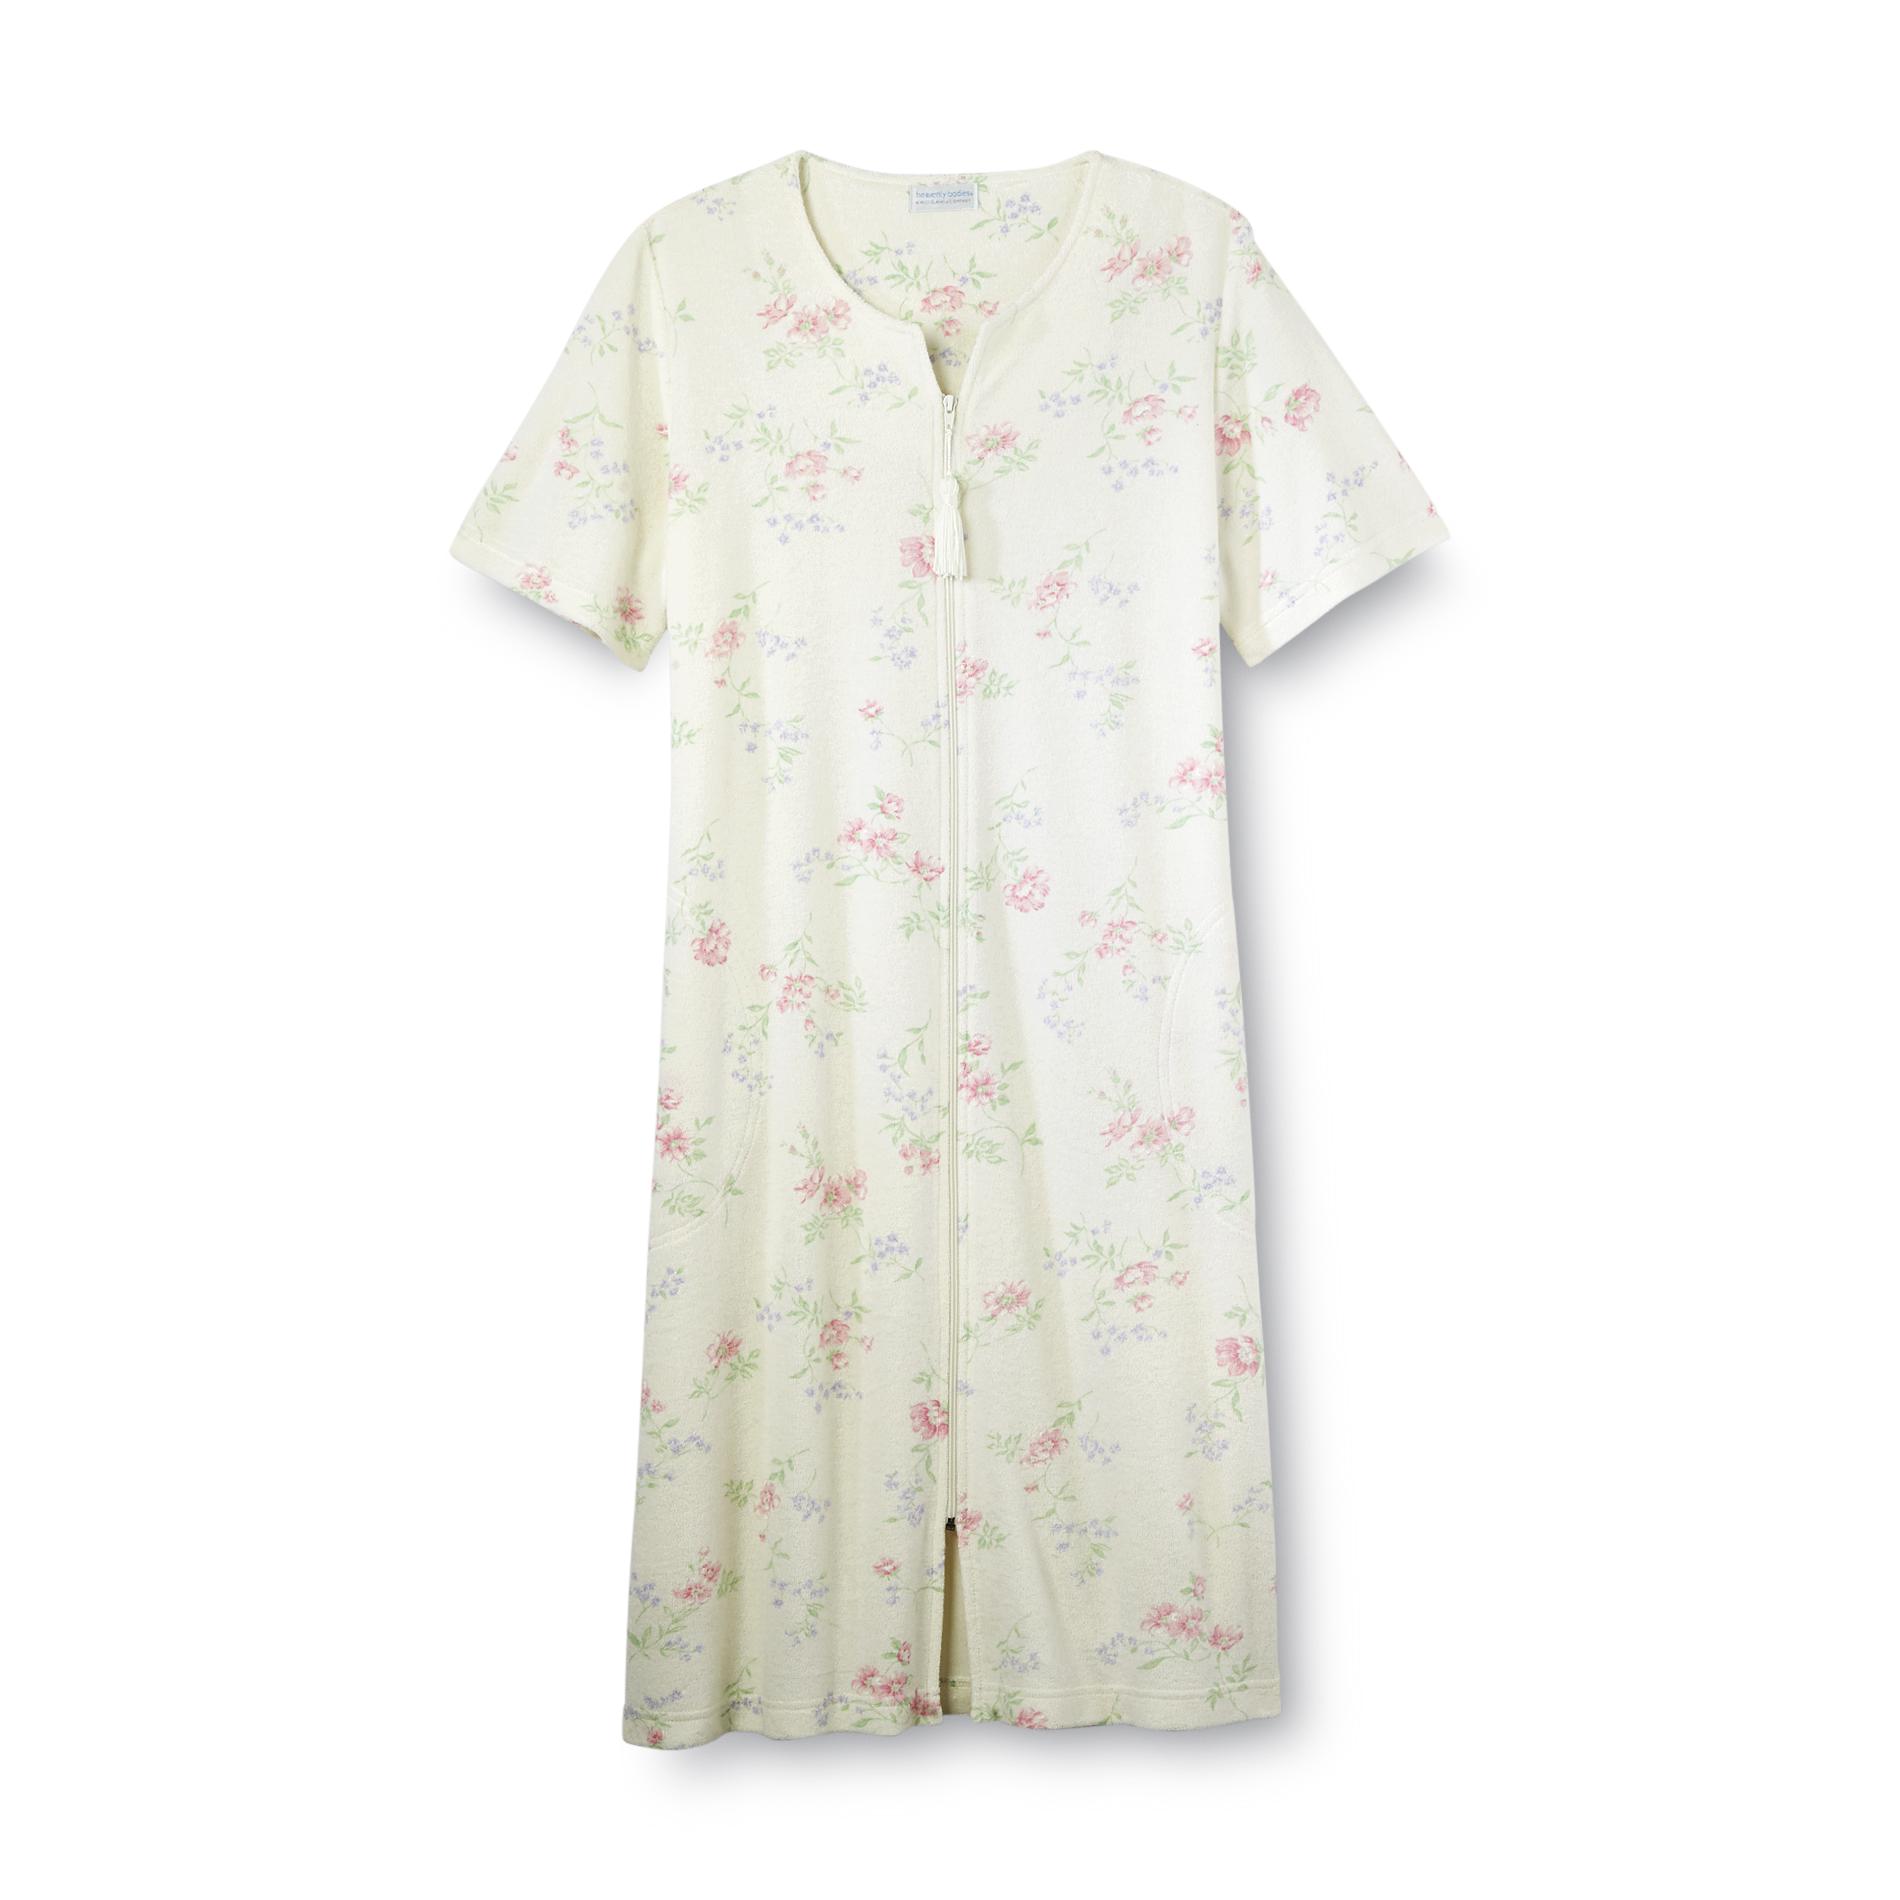 Heavenly Bodies by Miss Elaine Women's Short-Sleeve French Terry Robe - Floral